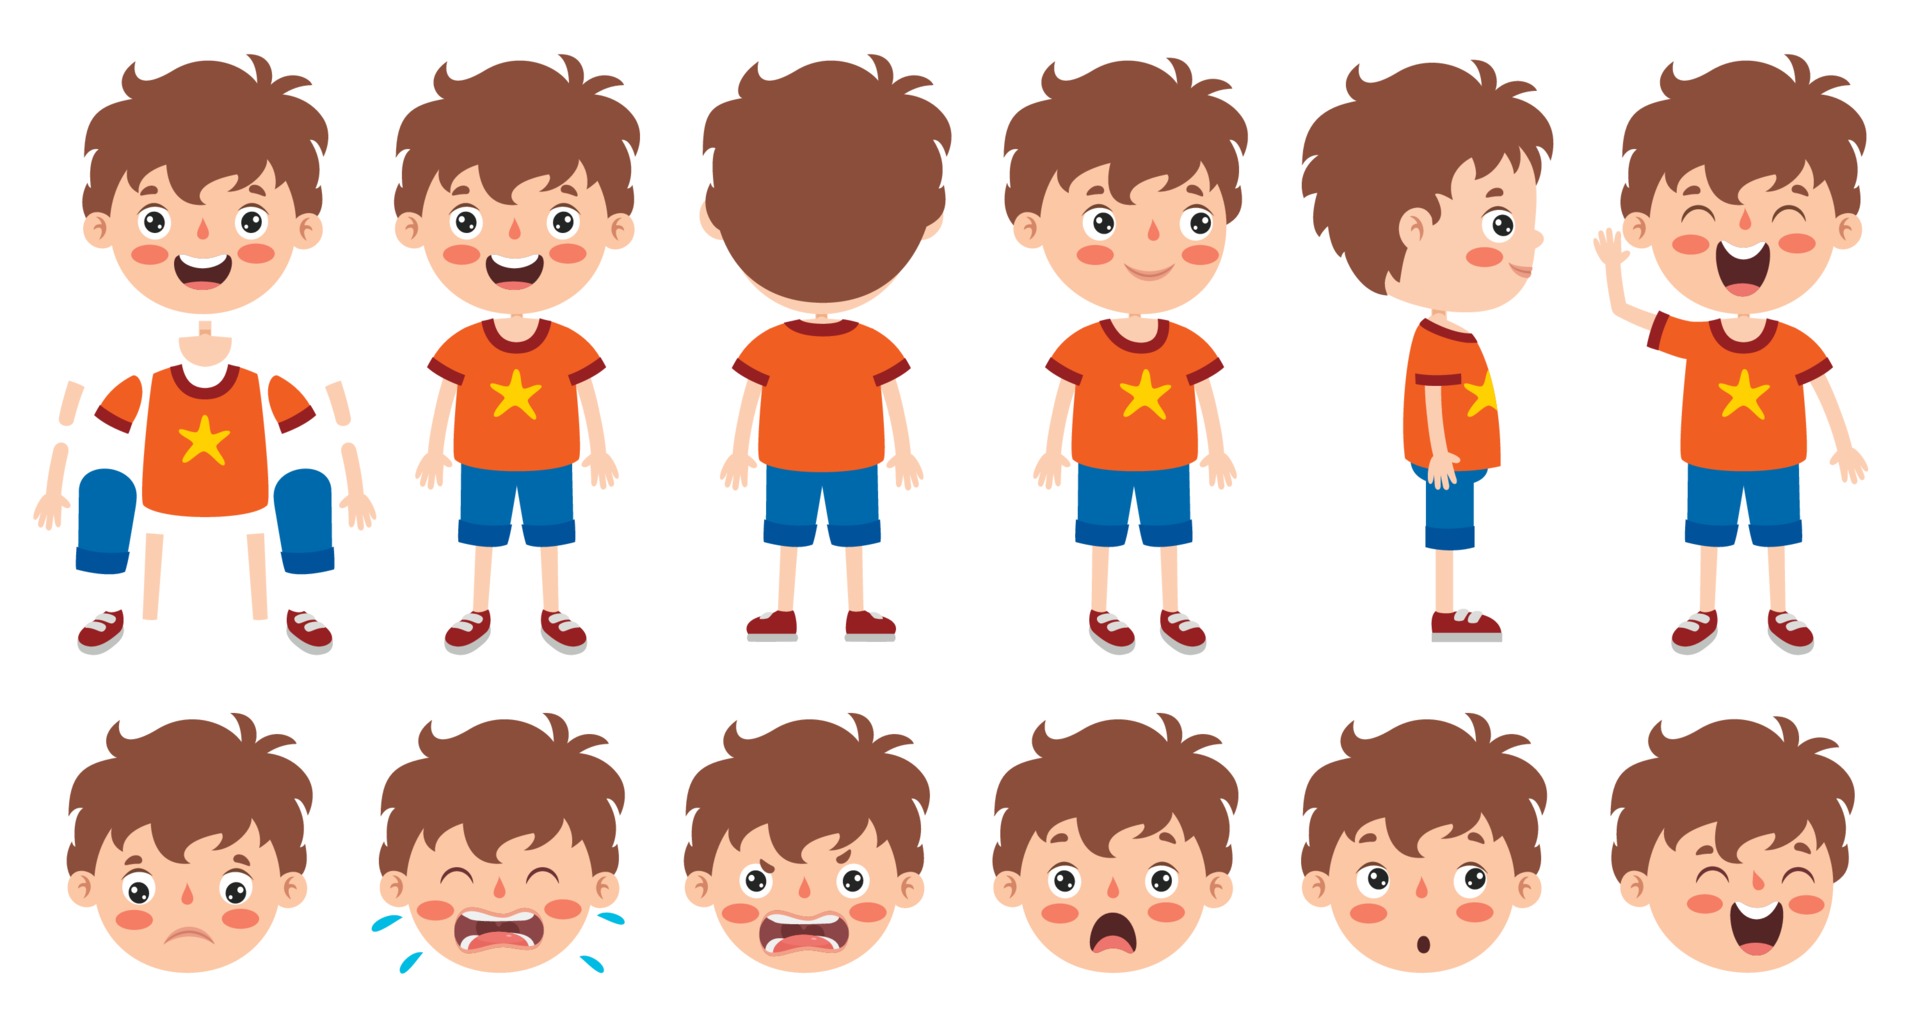 Download the Cartoon Character Design For Animation 2383536